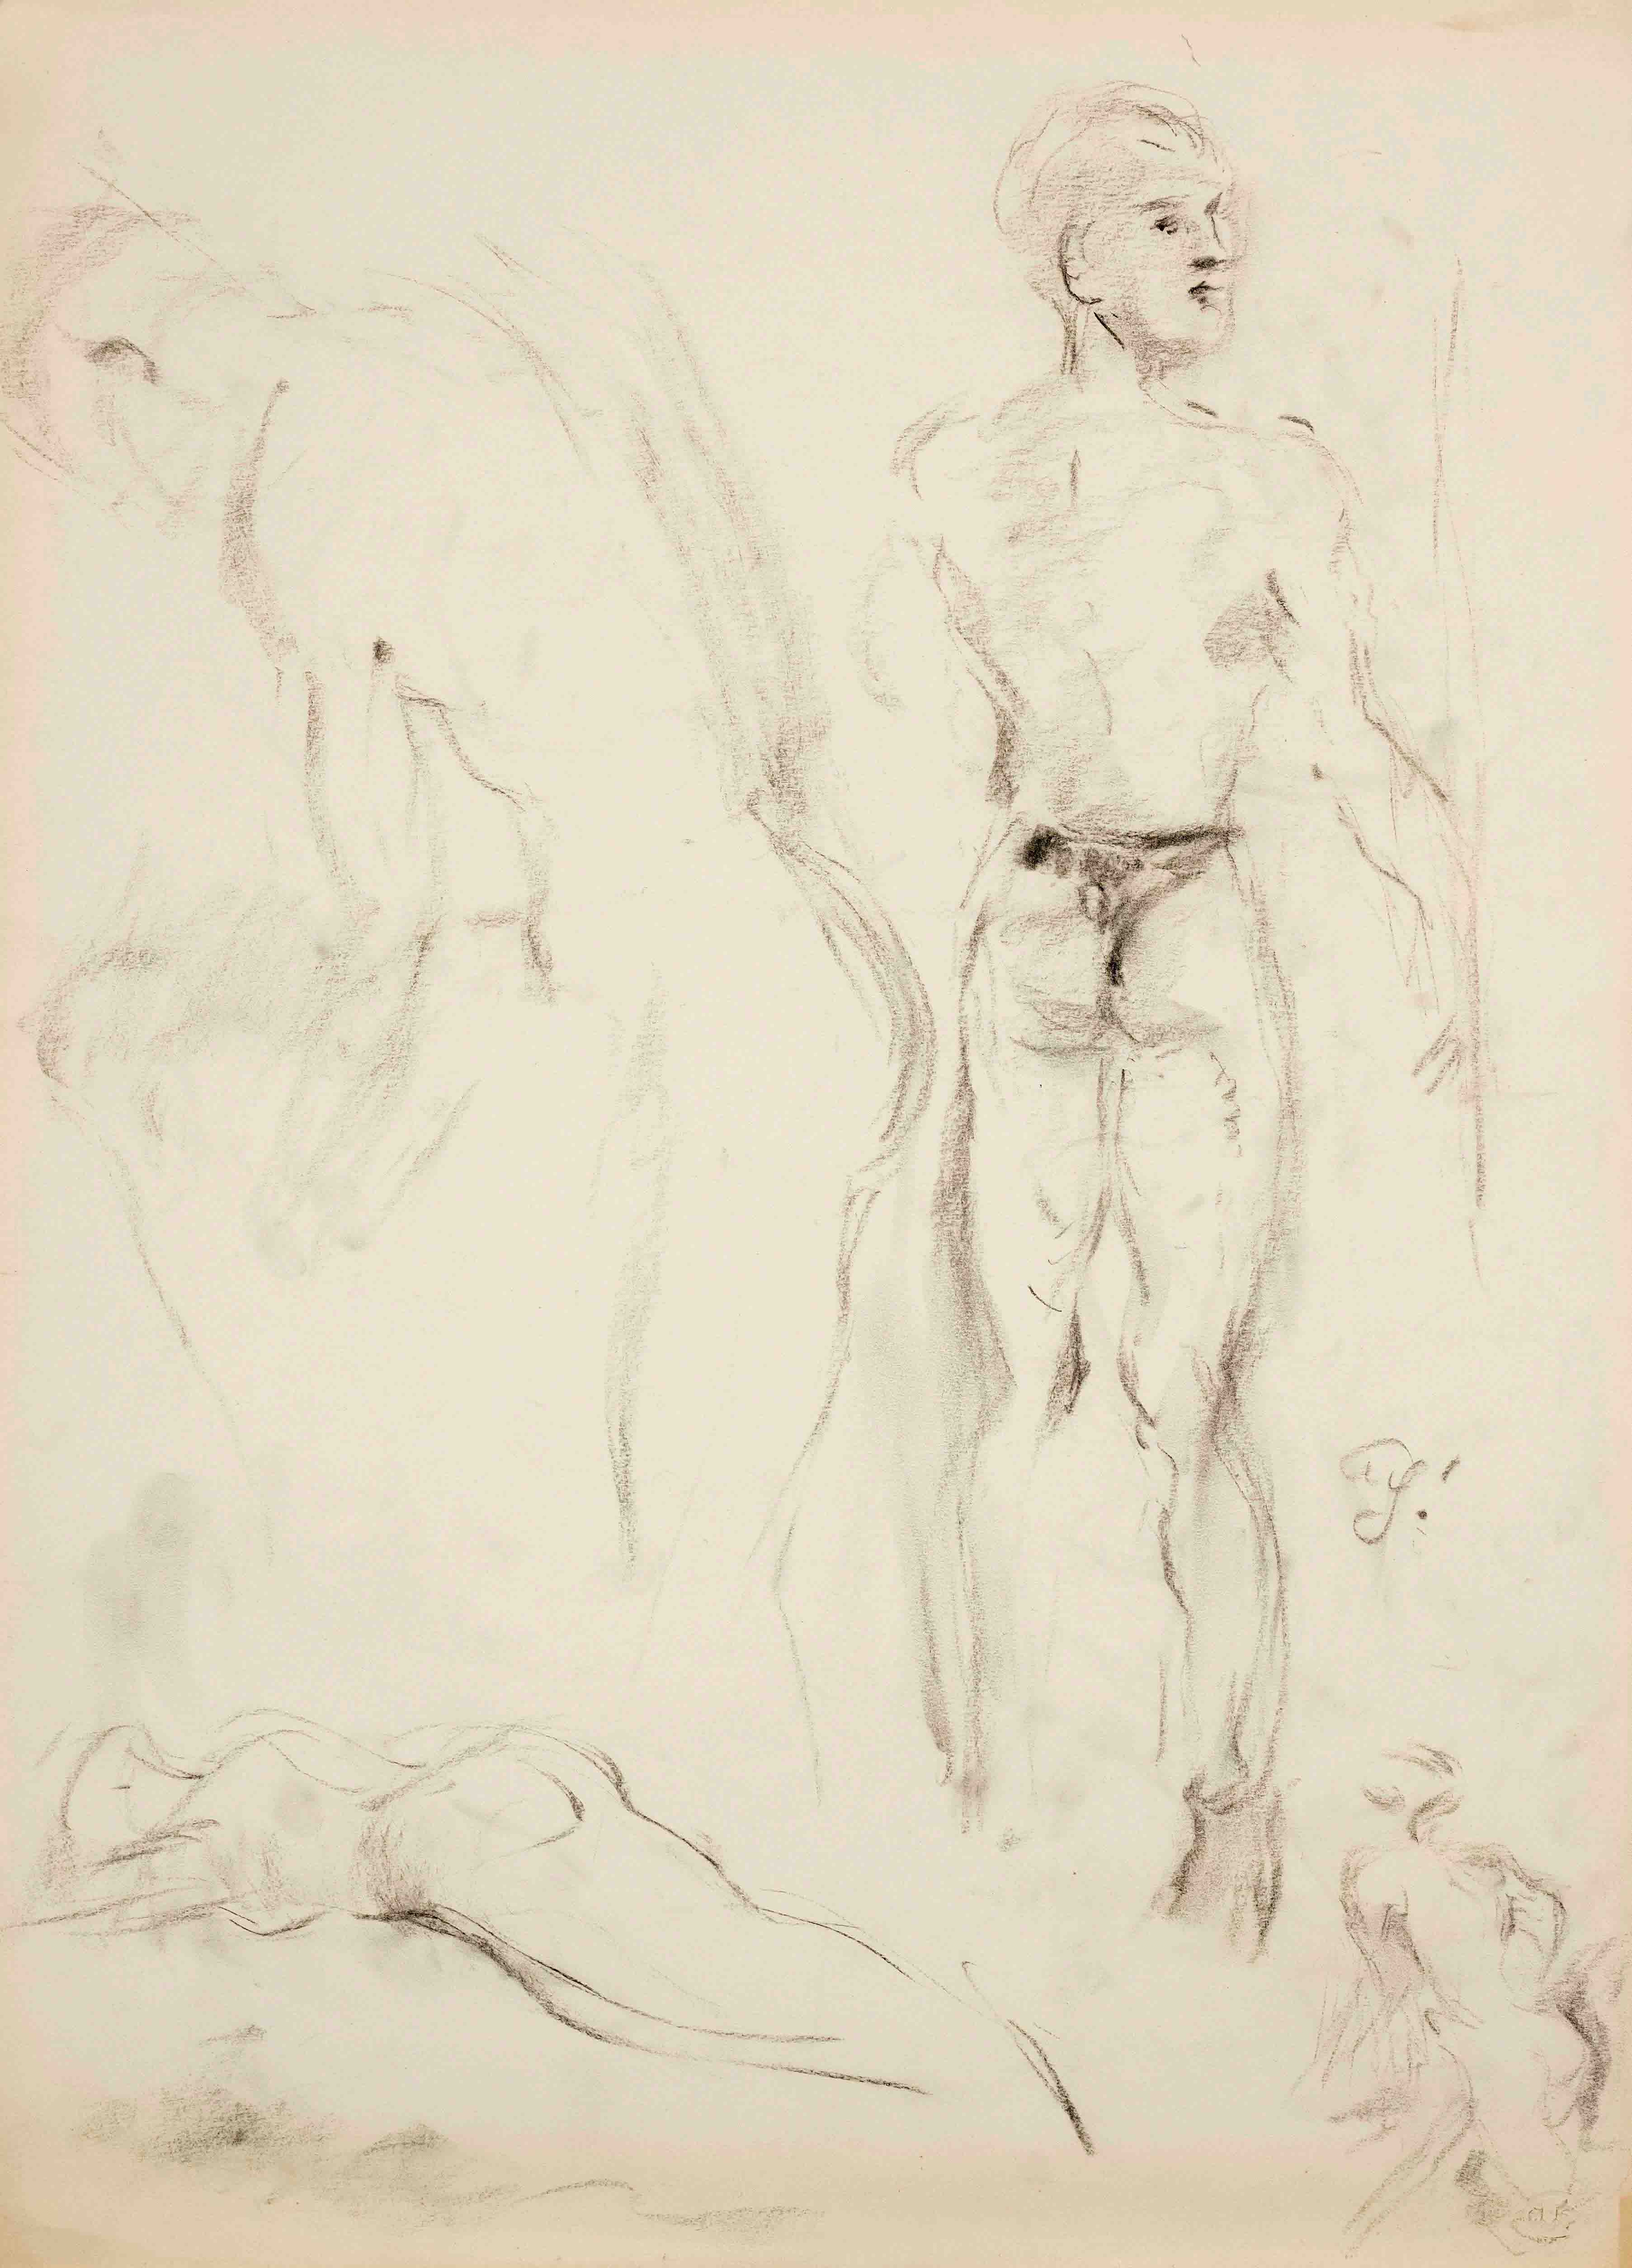 Focke, Wilhelm H. 1878 - Bremen - 1974. 3 fol. Studies of figures and movements. Charcoal/paper as - Image 3 of 3